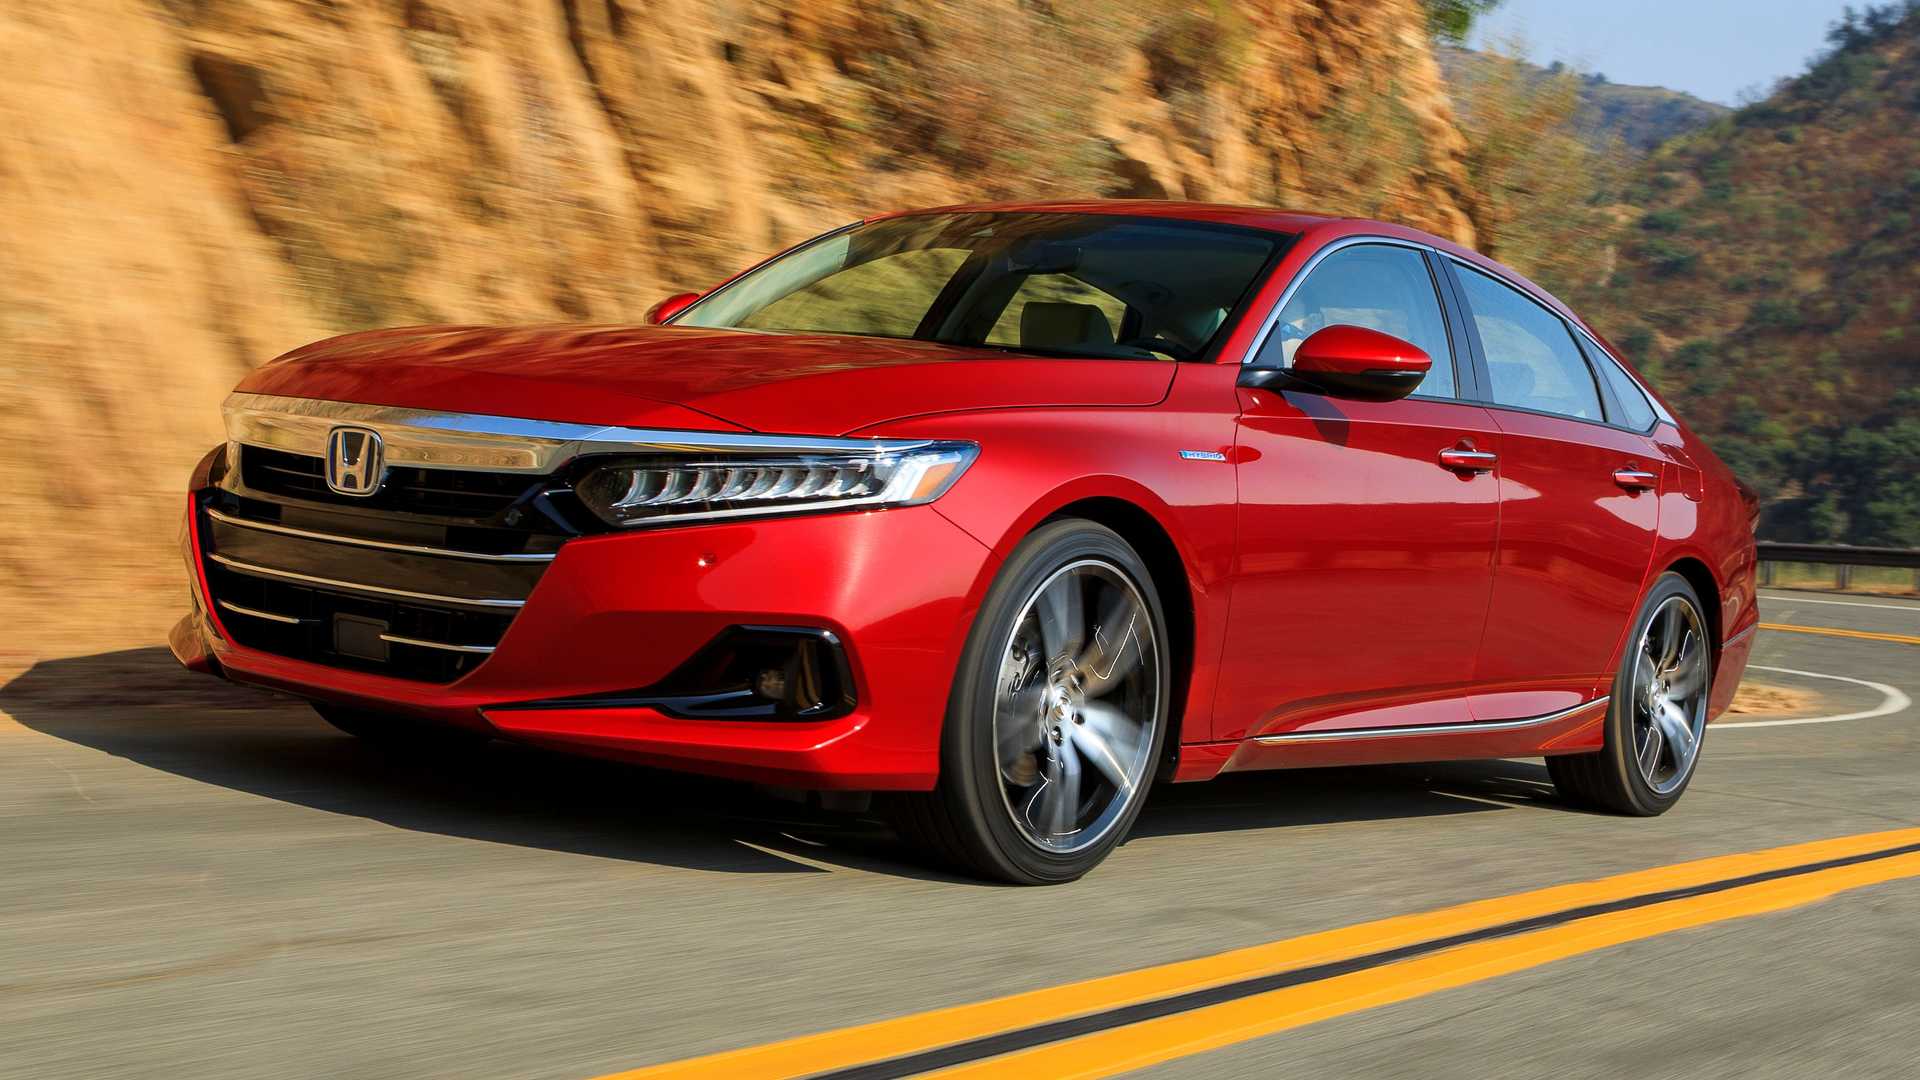 2021 Honda Accord, Refreshed With New Style And Tech, Debuts On October